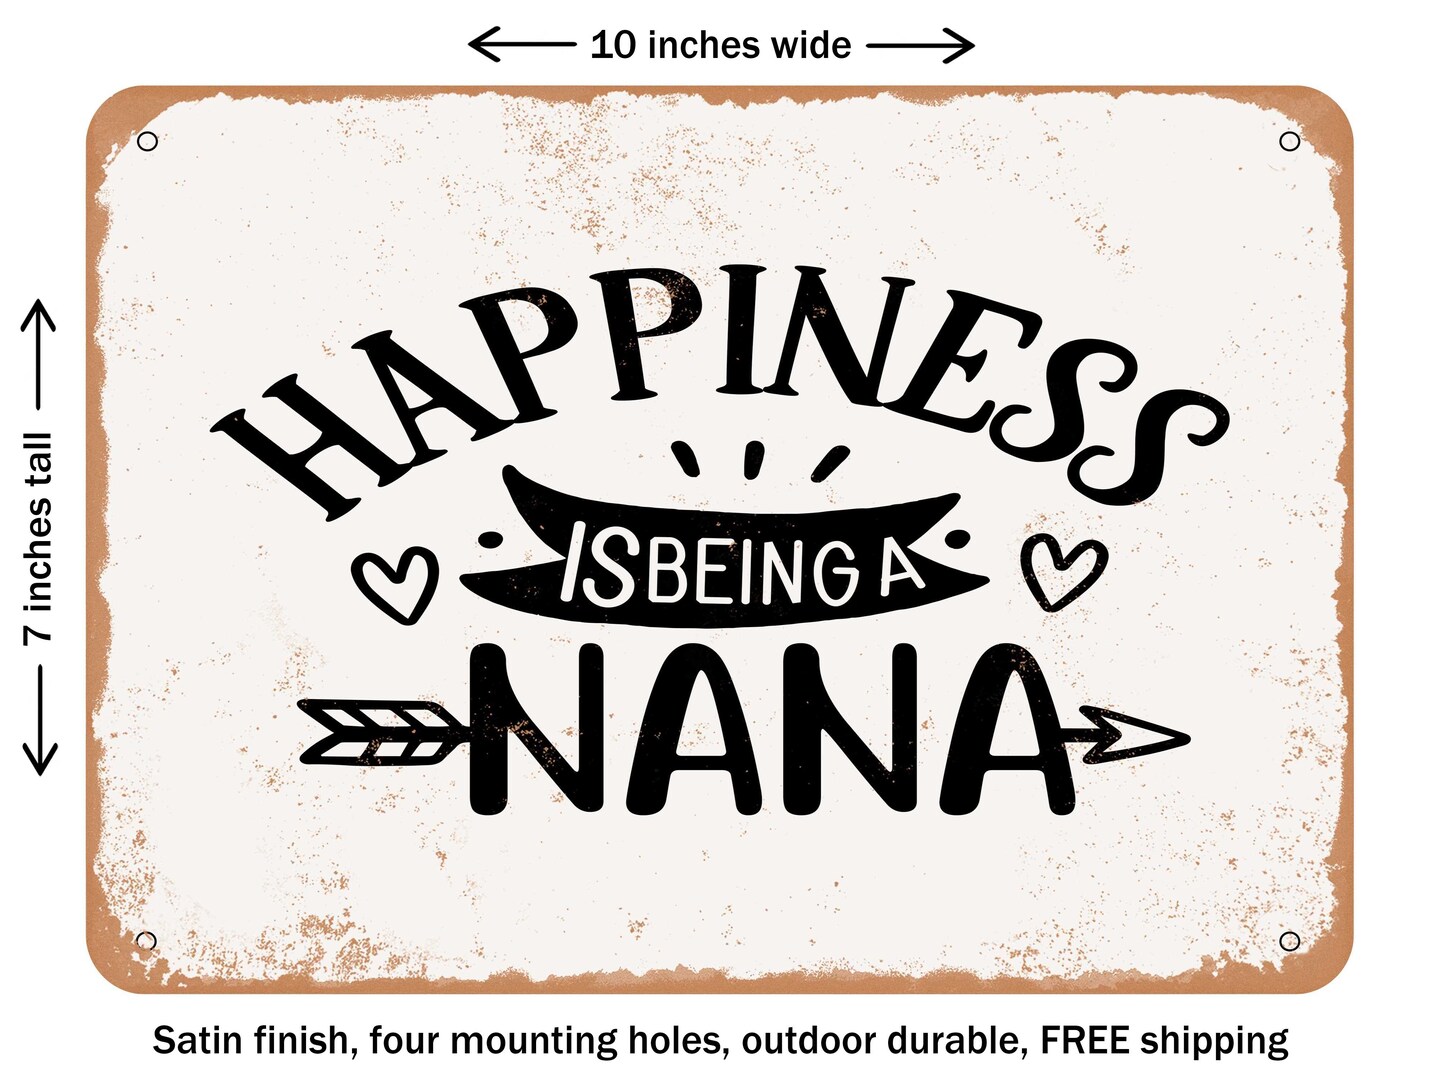 DECORATIVE METAL SIGN - Happiness is Being a Nana - Vintage Rusty Look